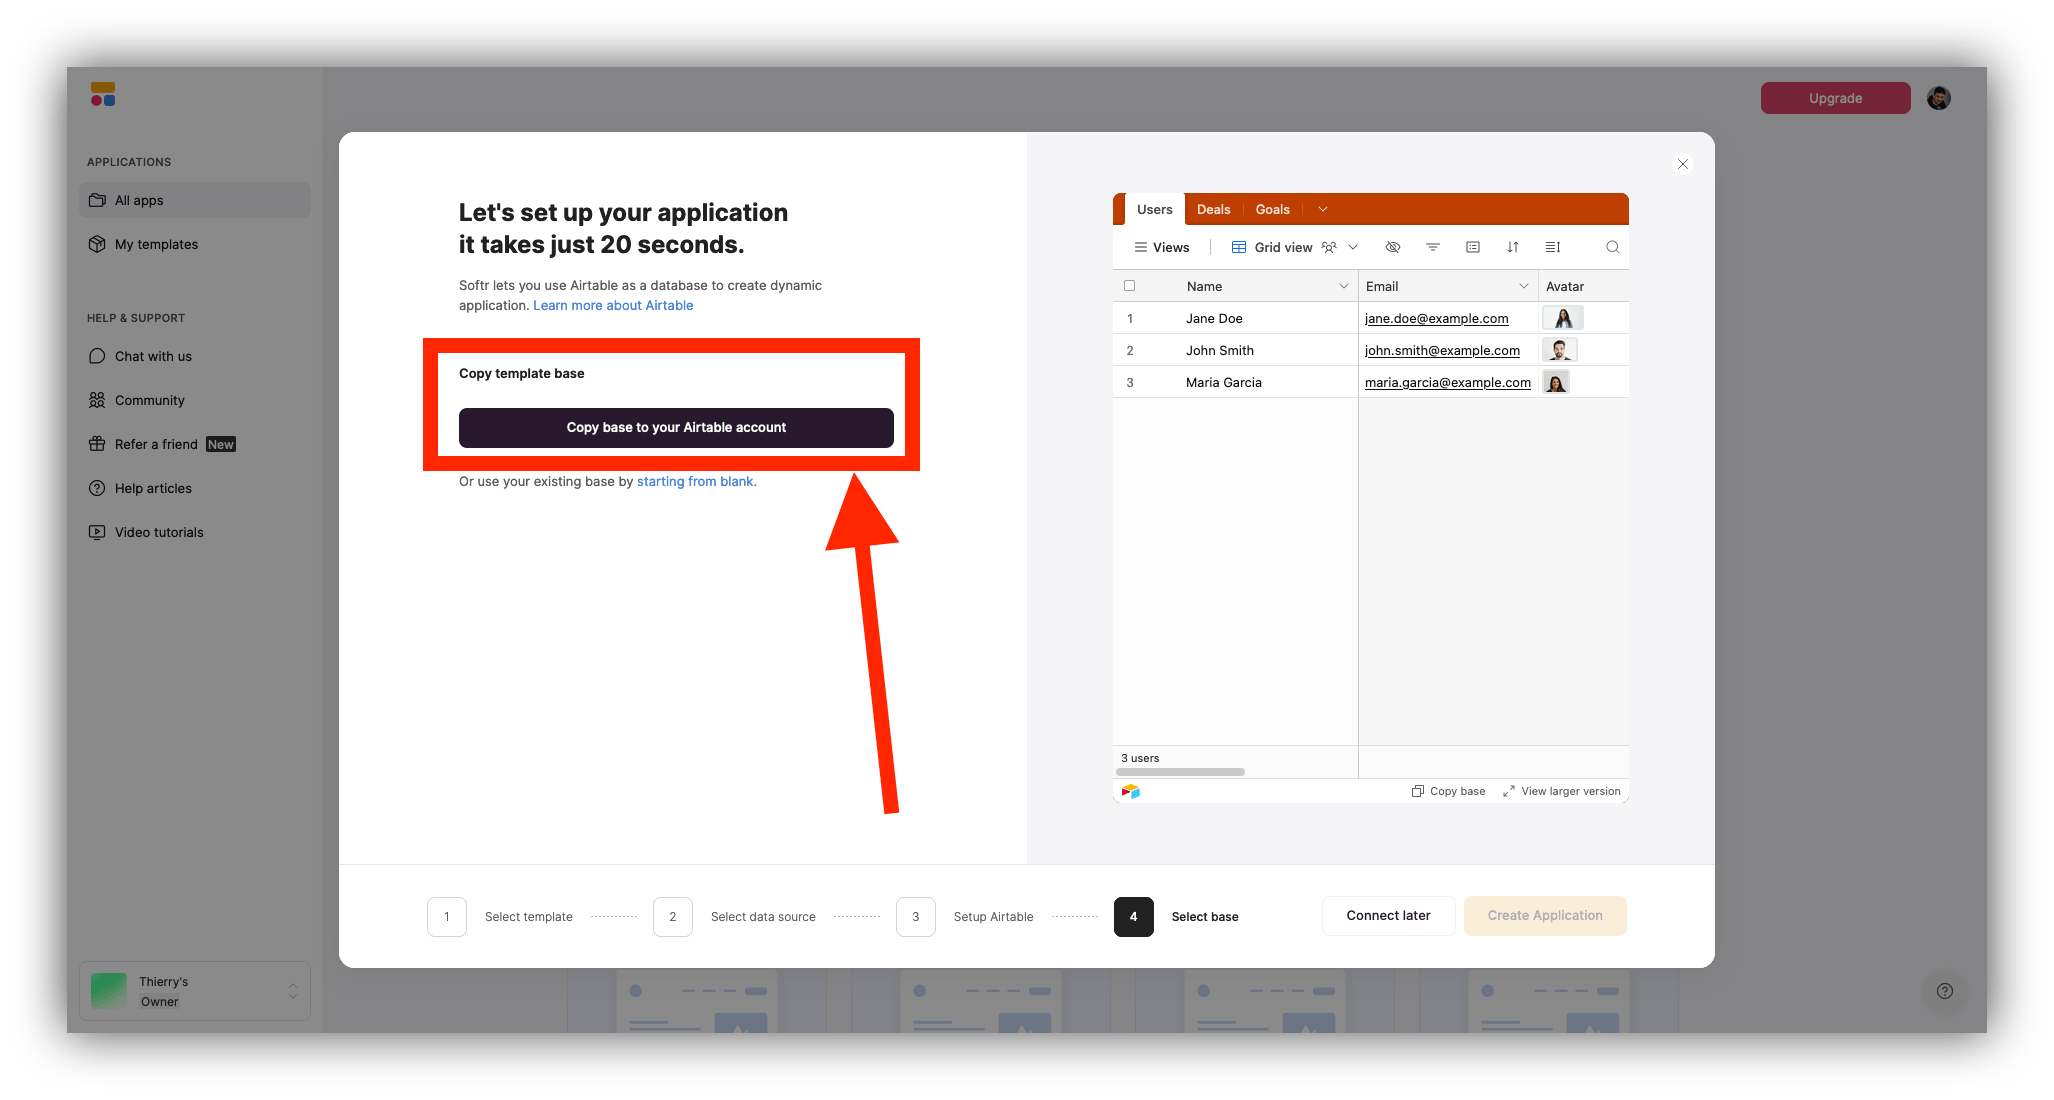 Step 7: Click on “Copy base to your Airtable account”